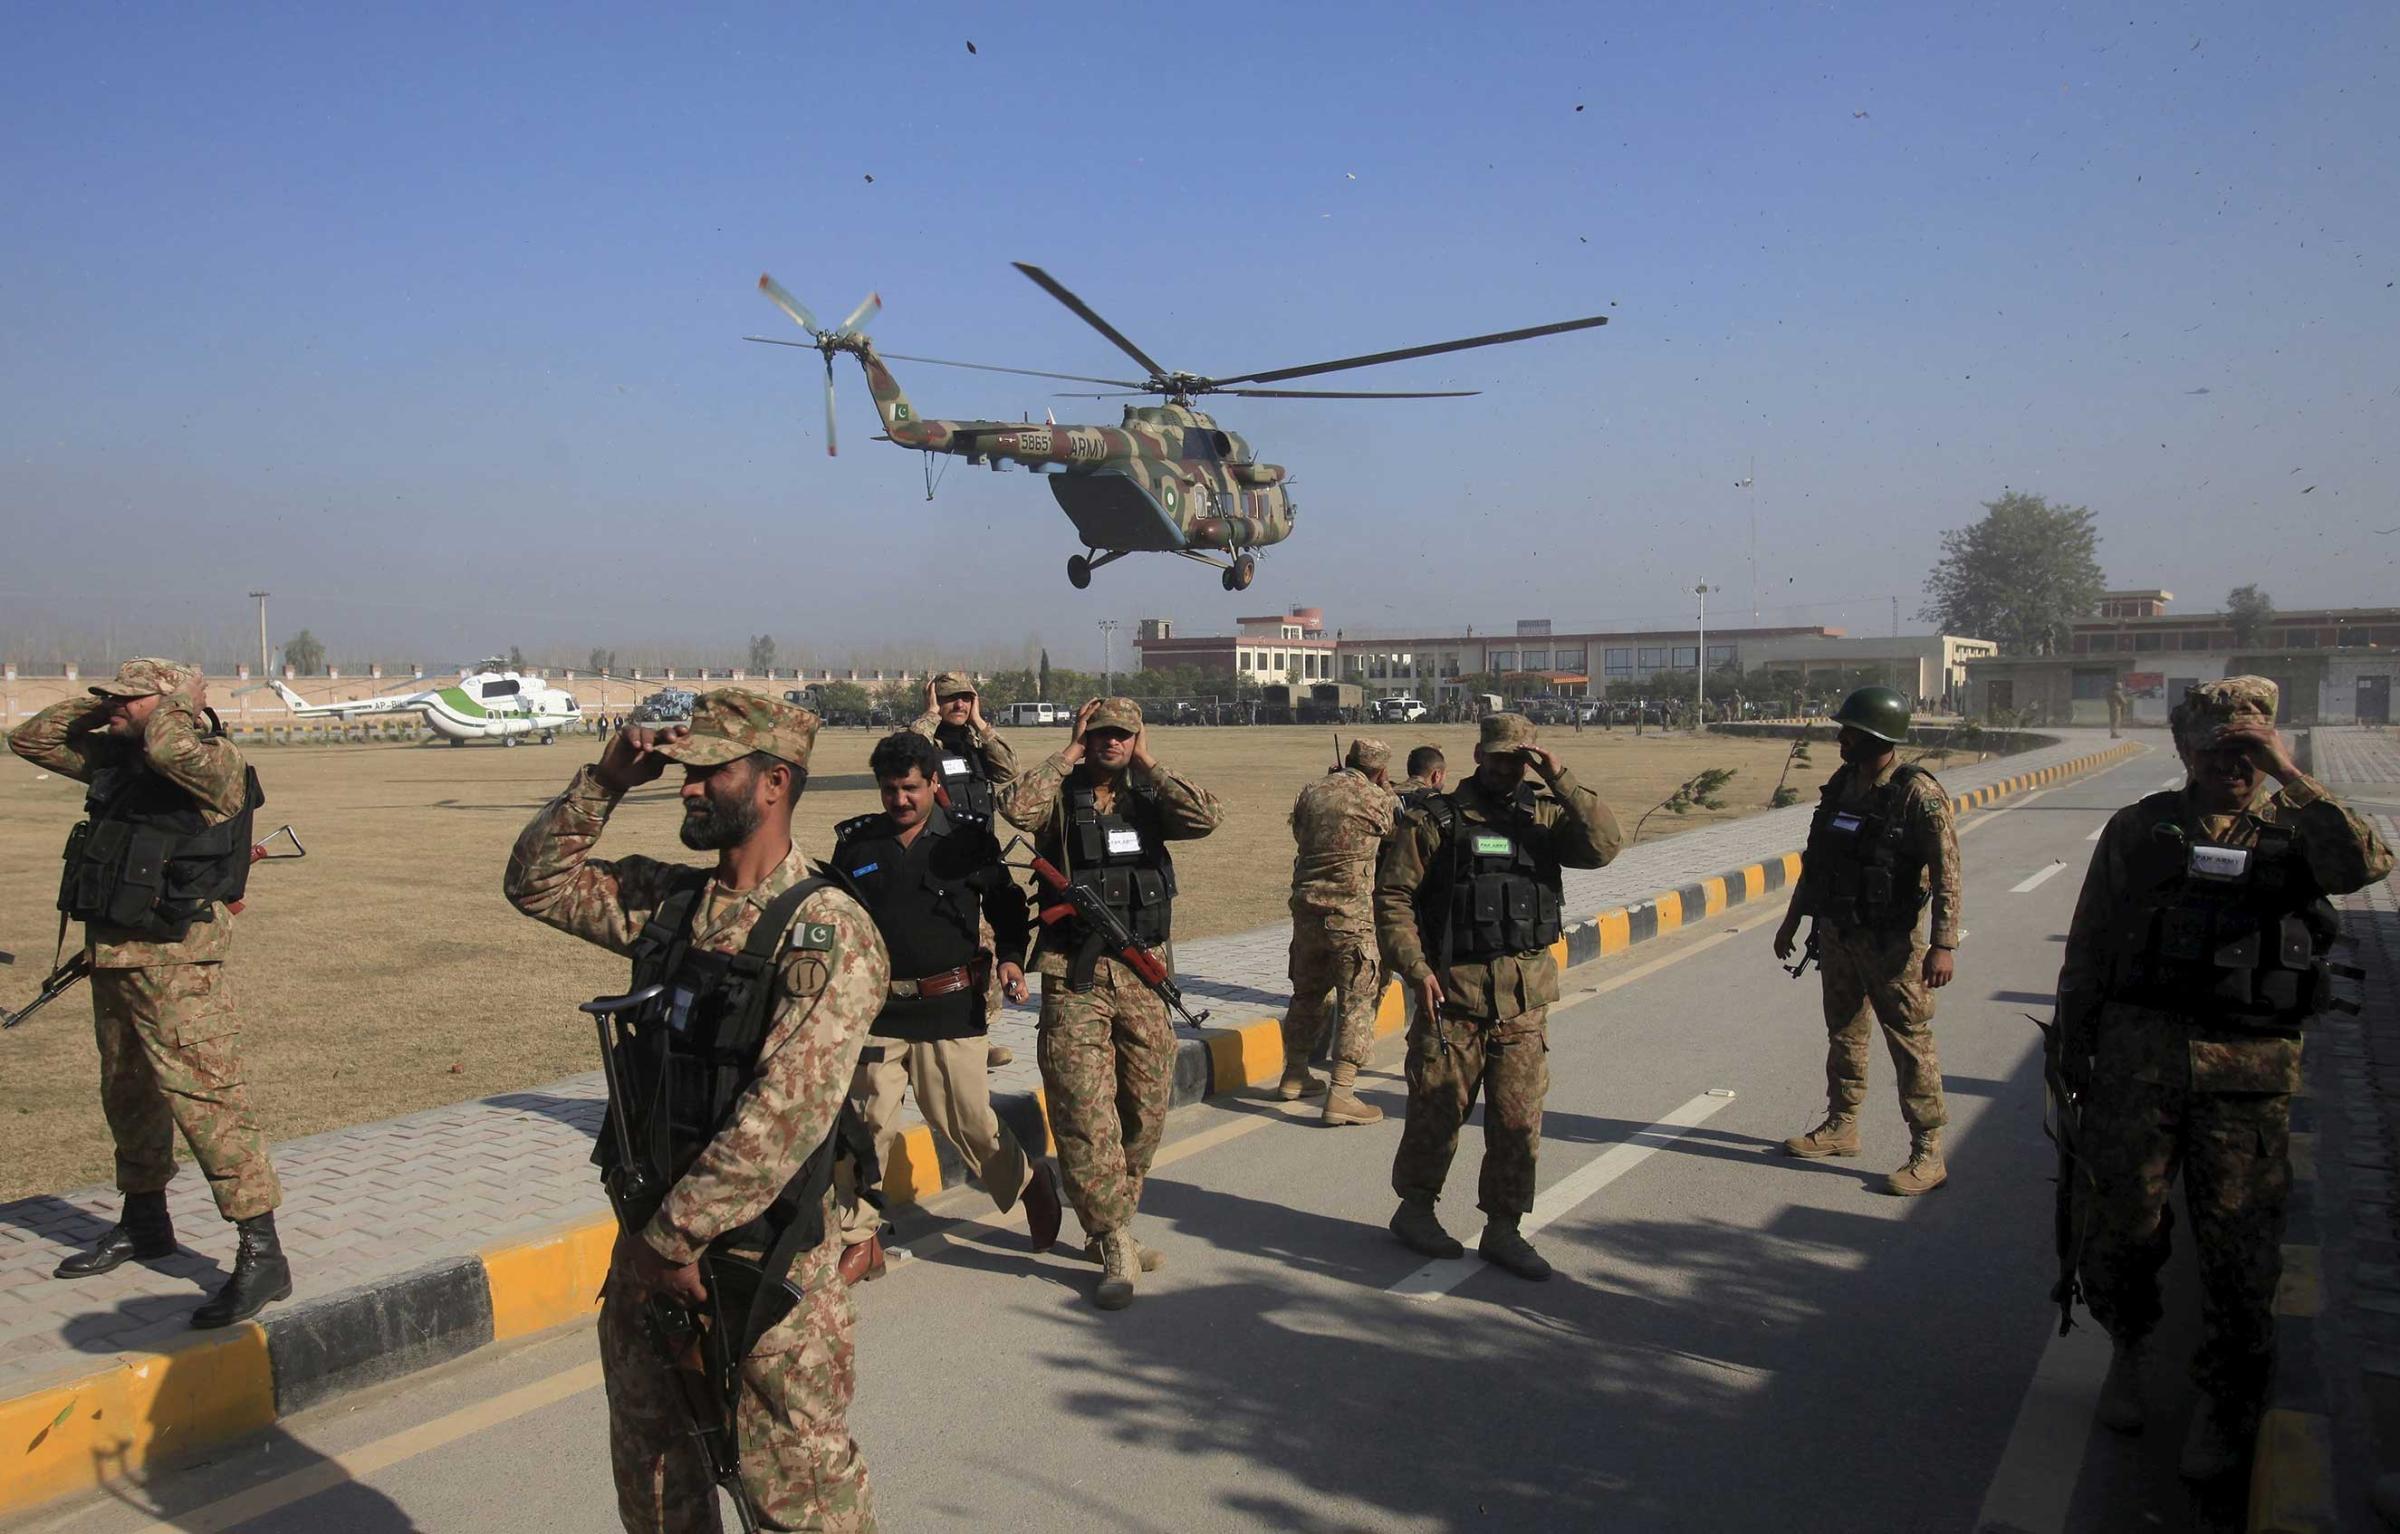 Soldiers holds their caps as a helicopter flies past during an operation, after a militant attack at Bacha Khan University in Charsadda, Pakistan, Jan. 20, 2016.